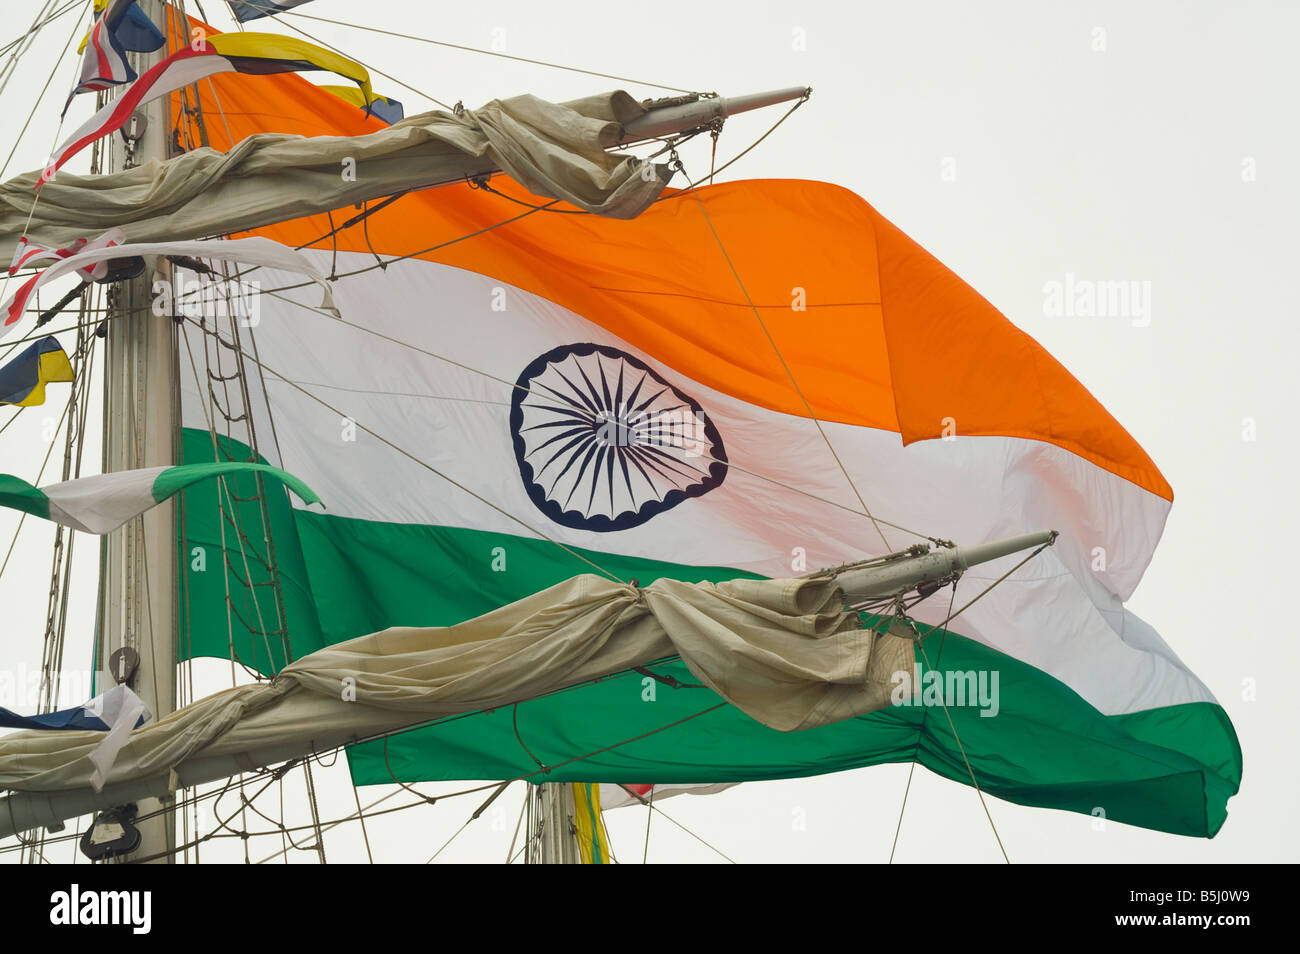 The Indian flag flies from the mast of the Indian Navy's training ship 'Tarangini'. Stock Photo